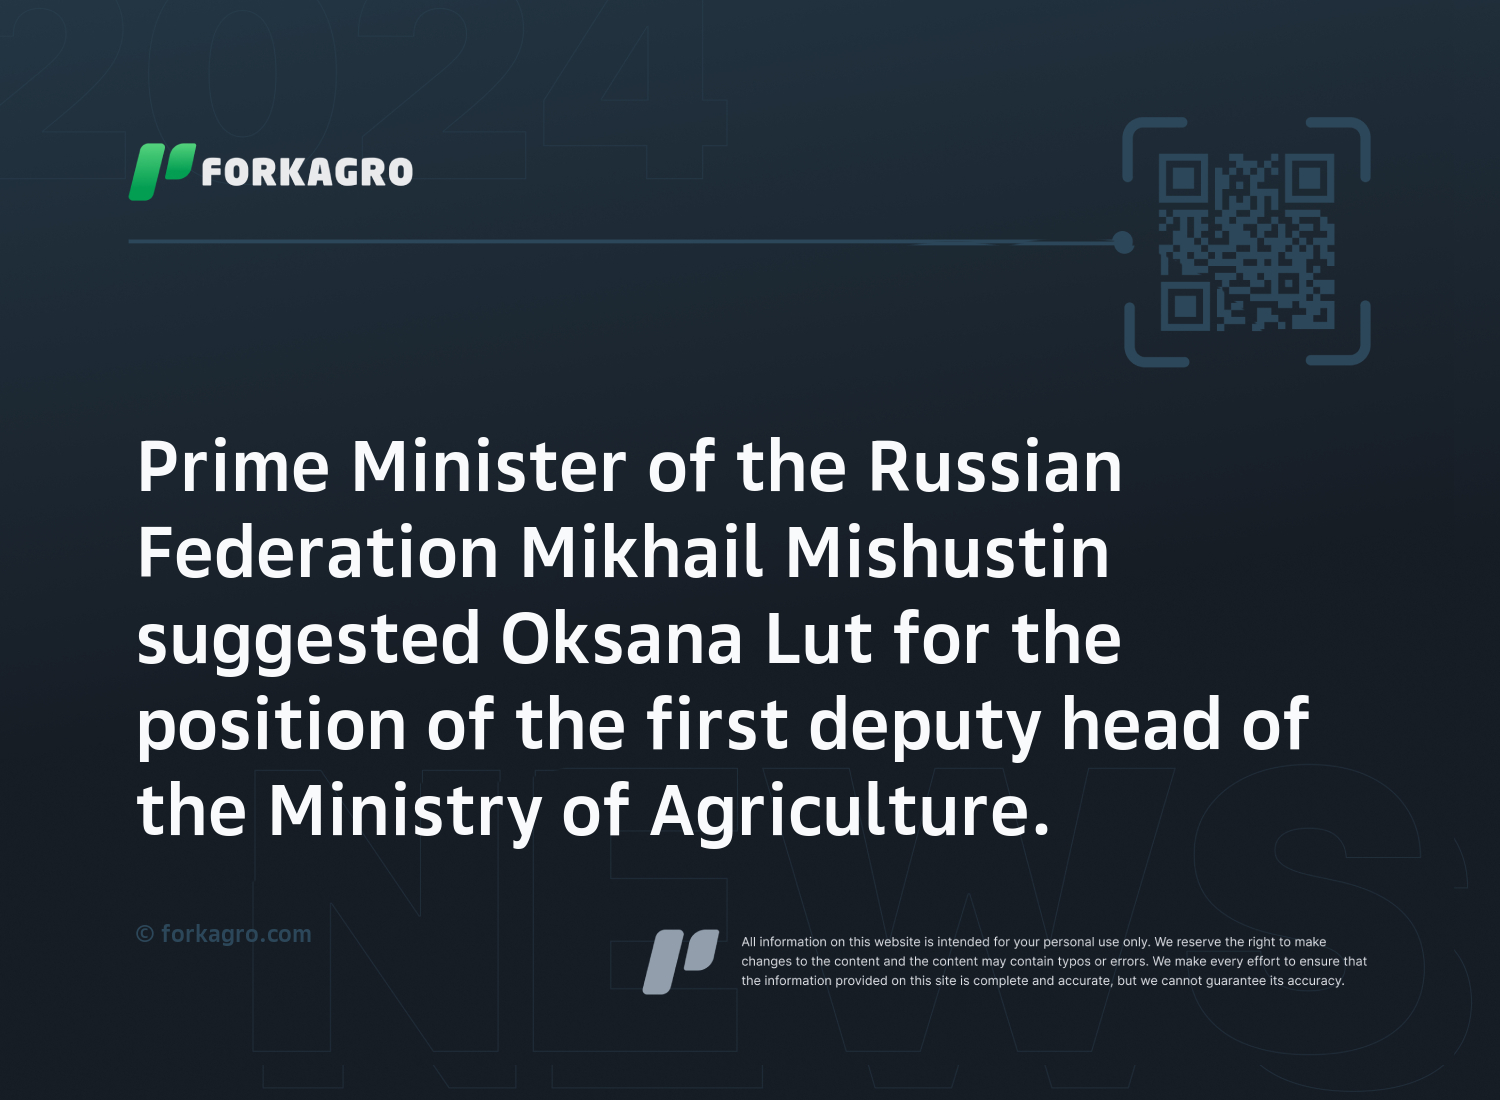 Prime Minister of the Russian Federation Mikhail Mishustin suggested Oksana Lut for the position of the first deputy head of the Ministry of Agriculture.